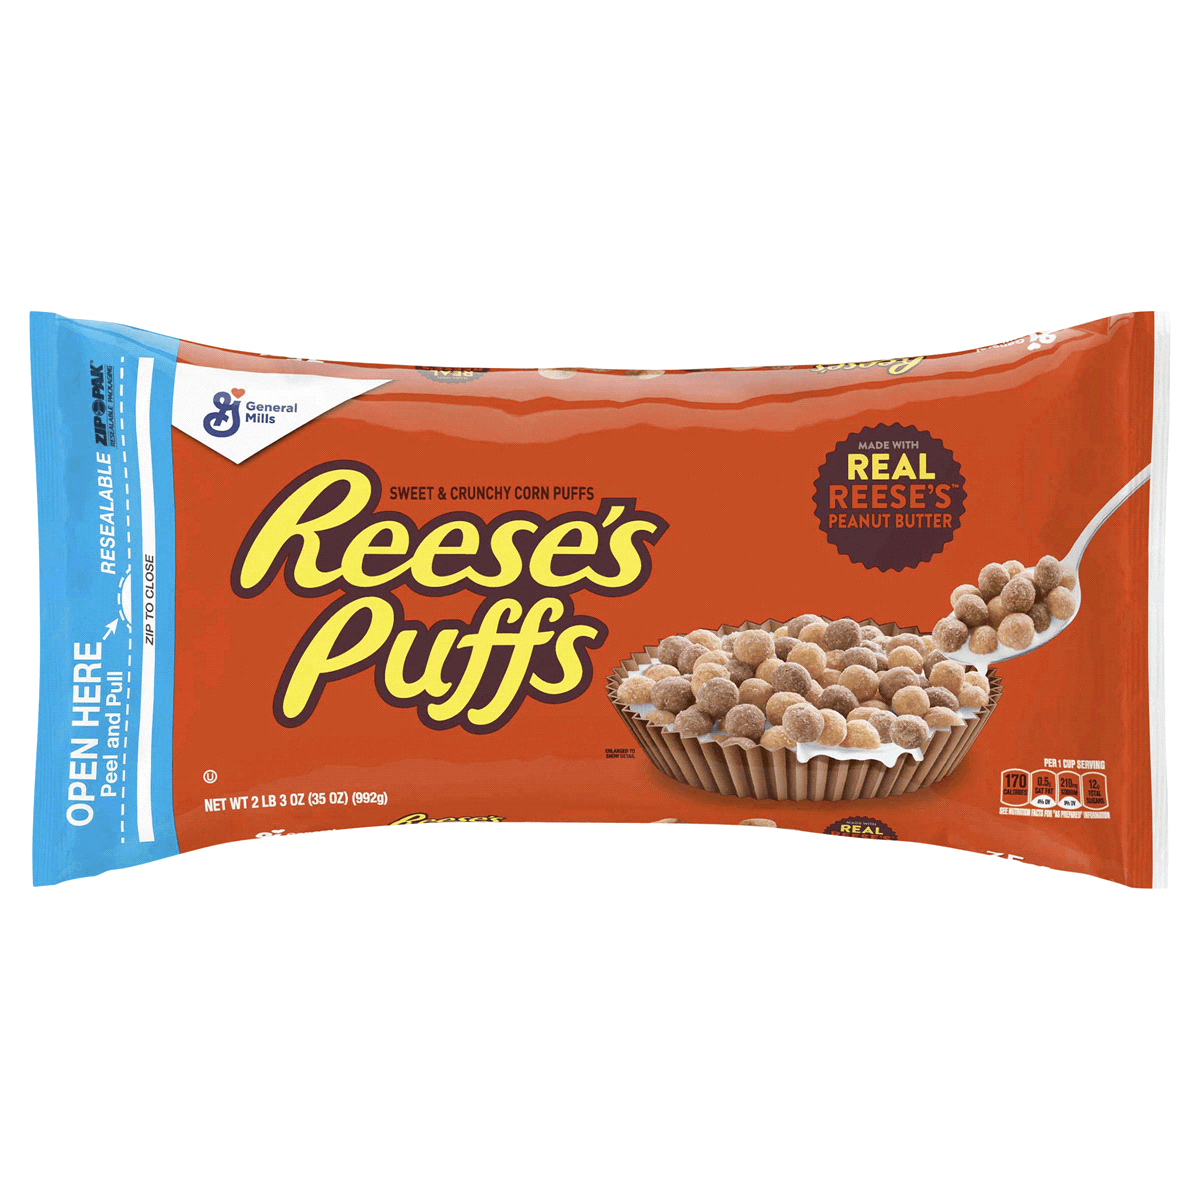 Reeses Puffs Cereal Bag 992g